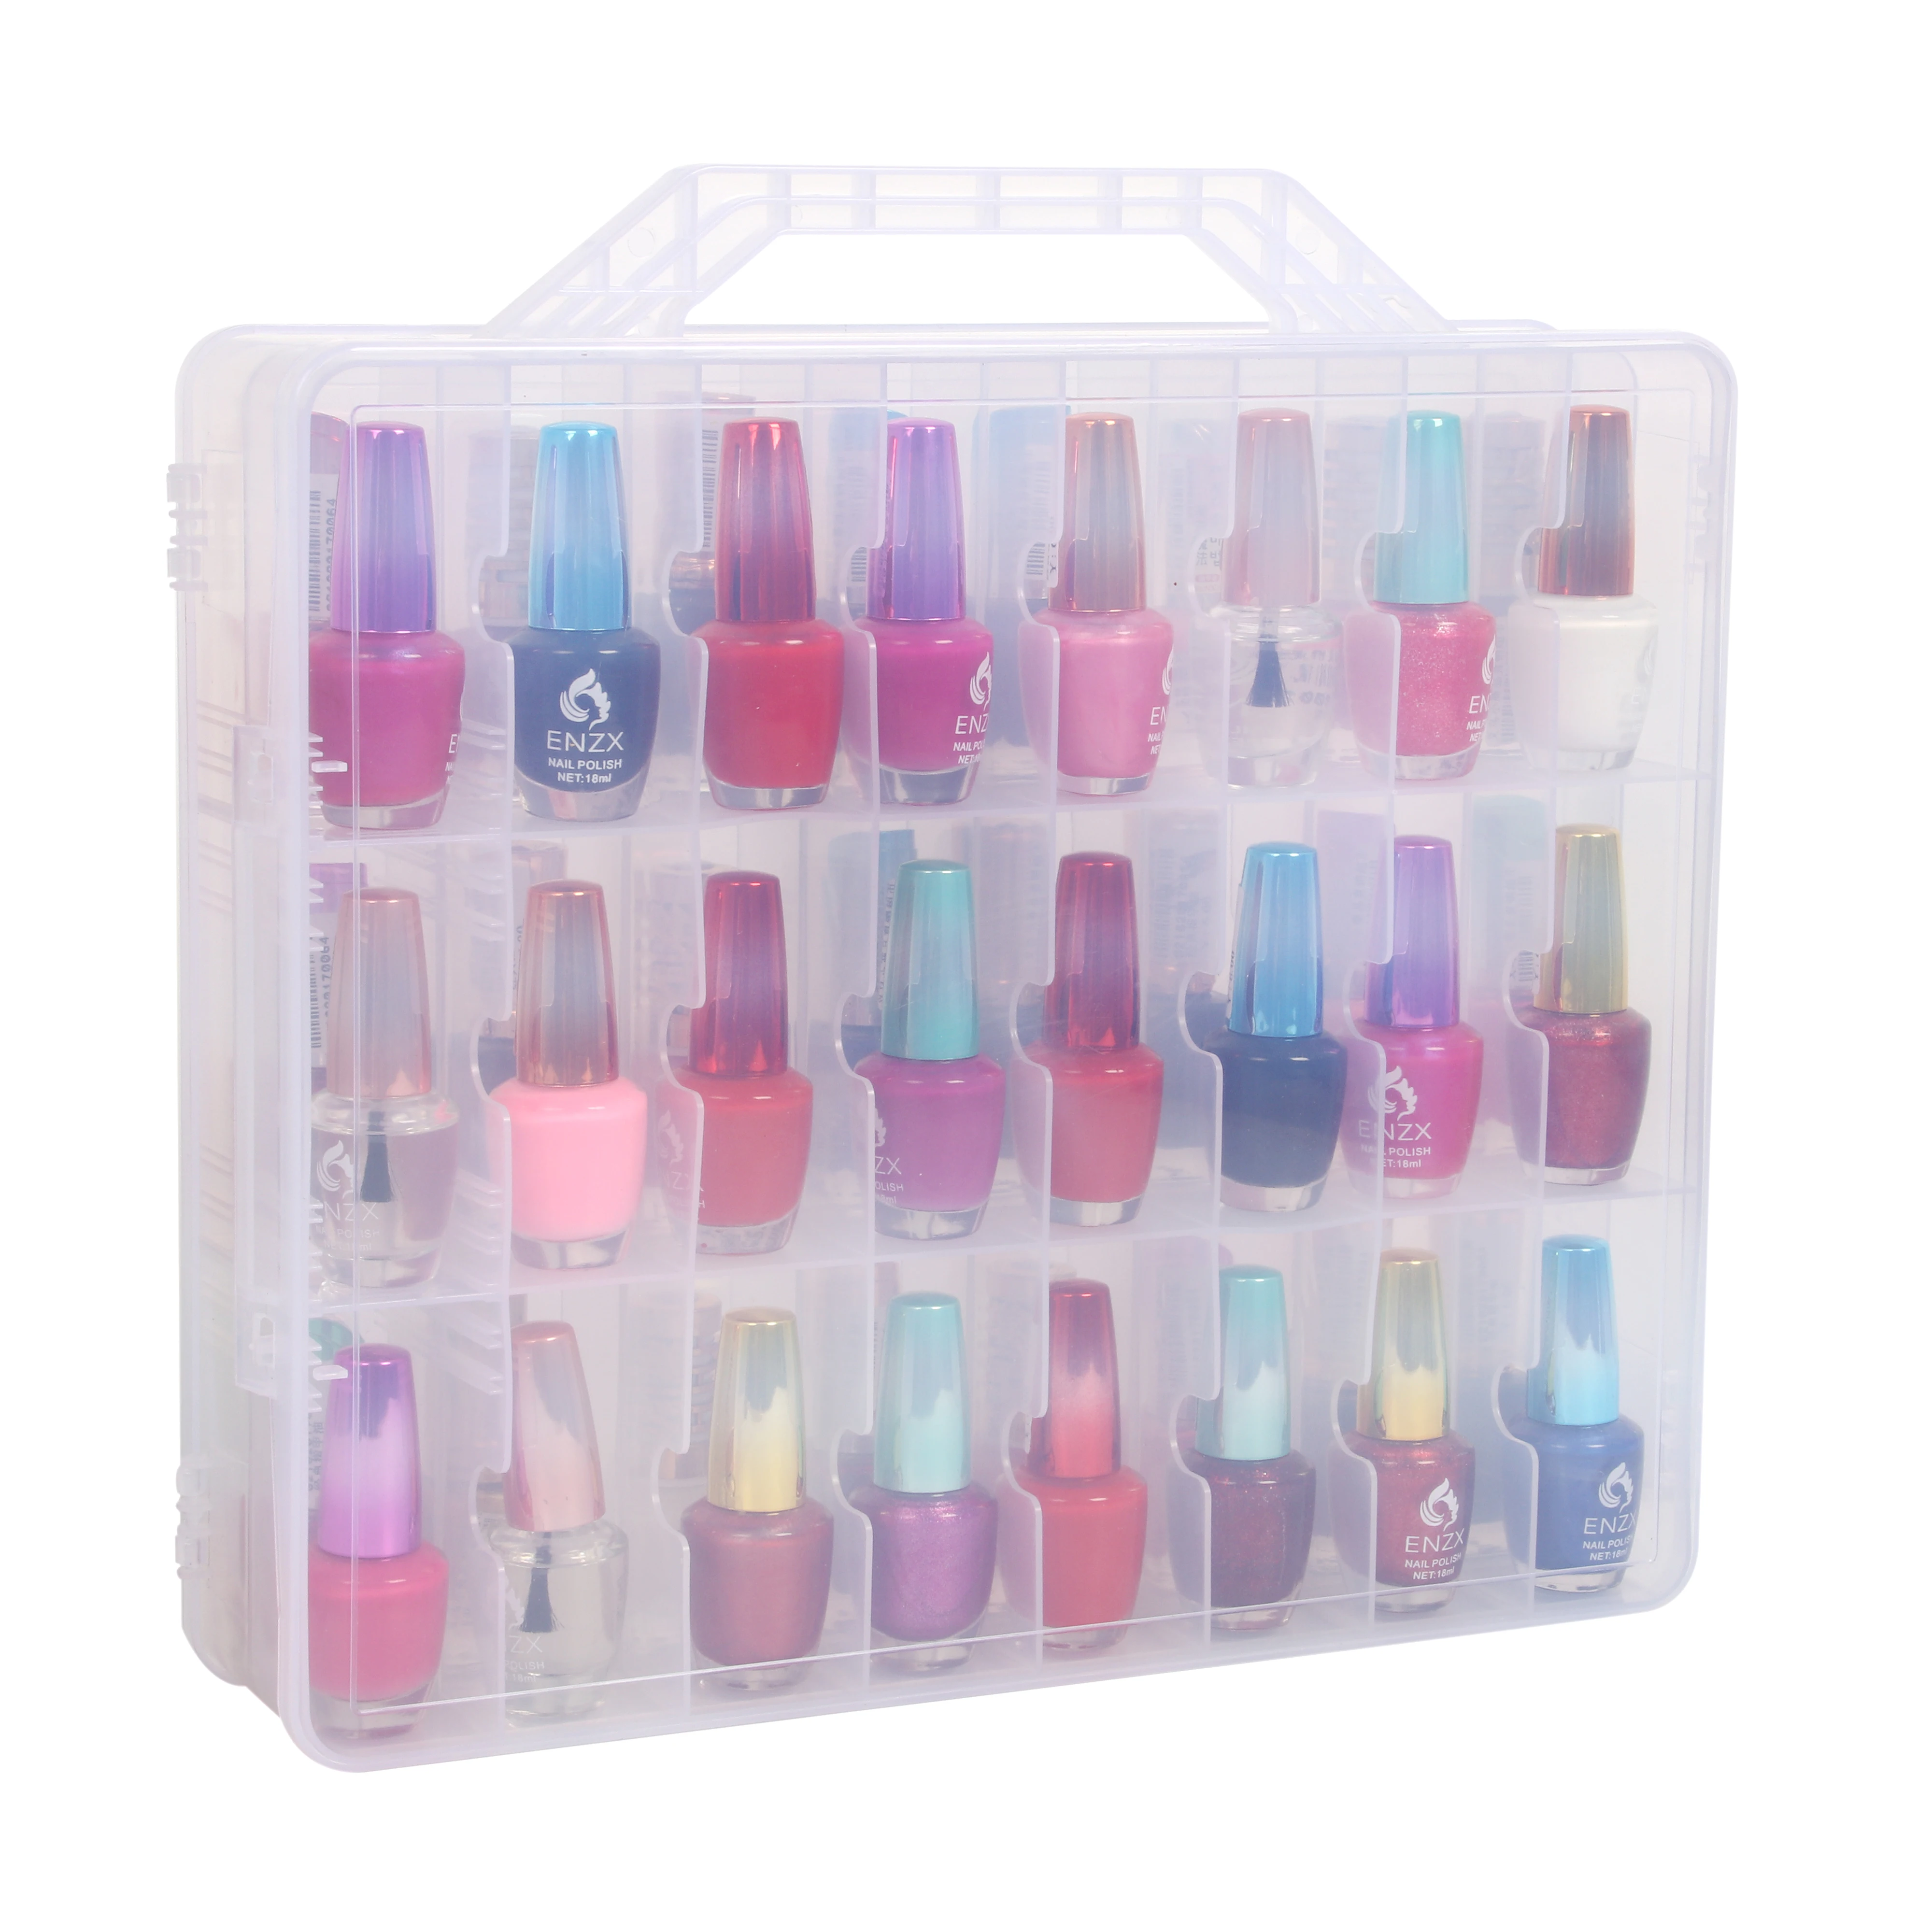 PVC Packaging Boxes for Nail Paint manufacturer, supplier and exporter in  Mumbai, India